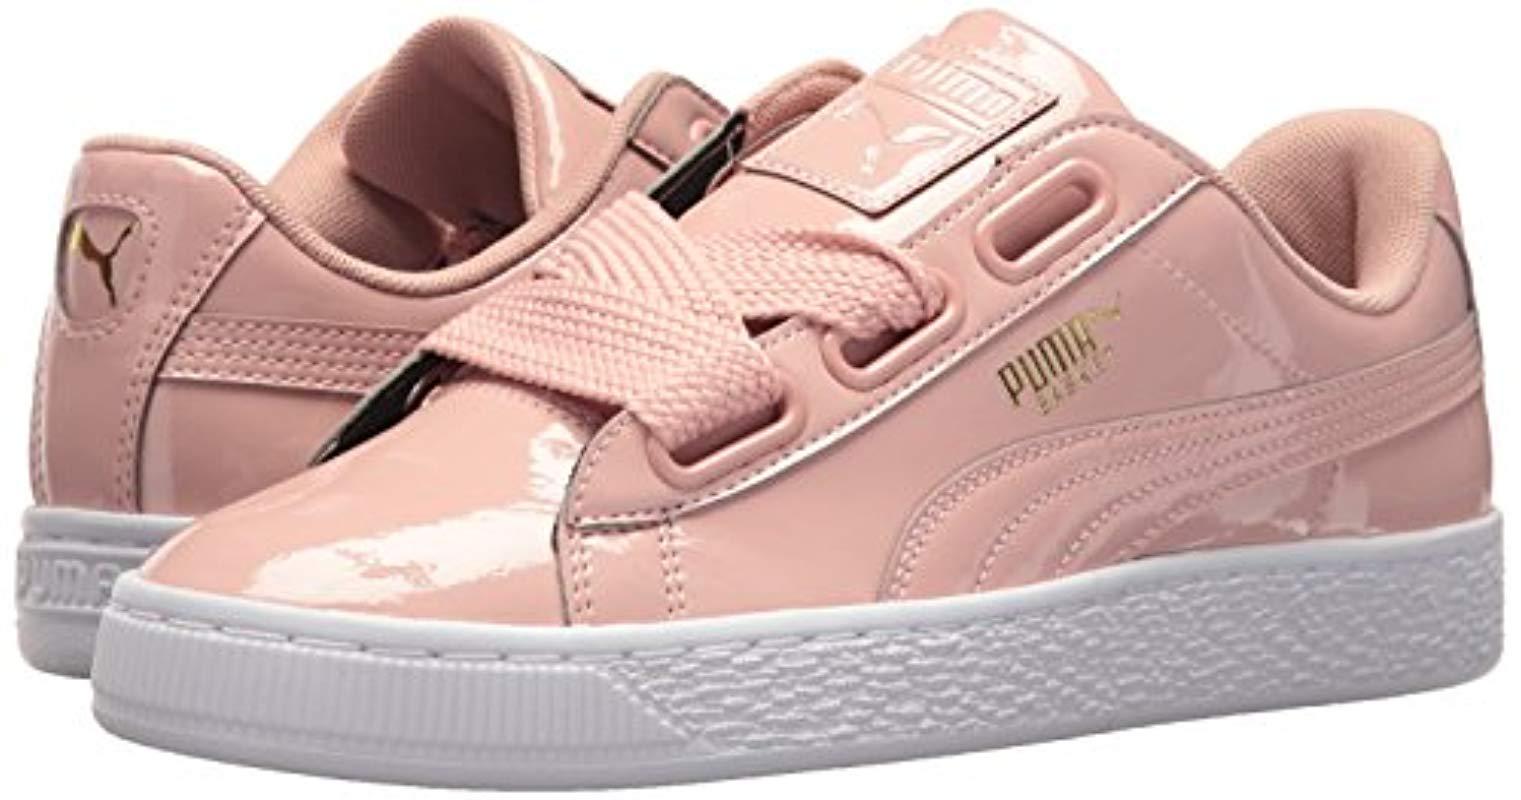 PUMA Basket Heart Patent Wn's Trainers - Lyst